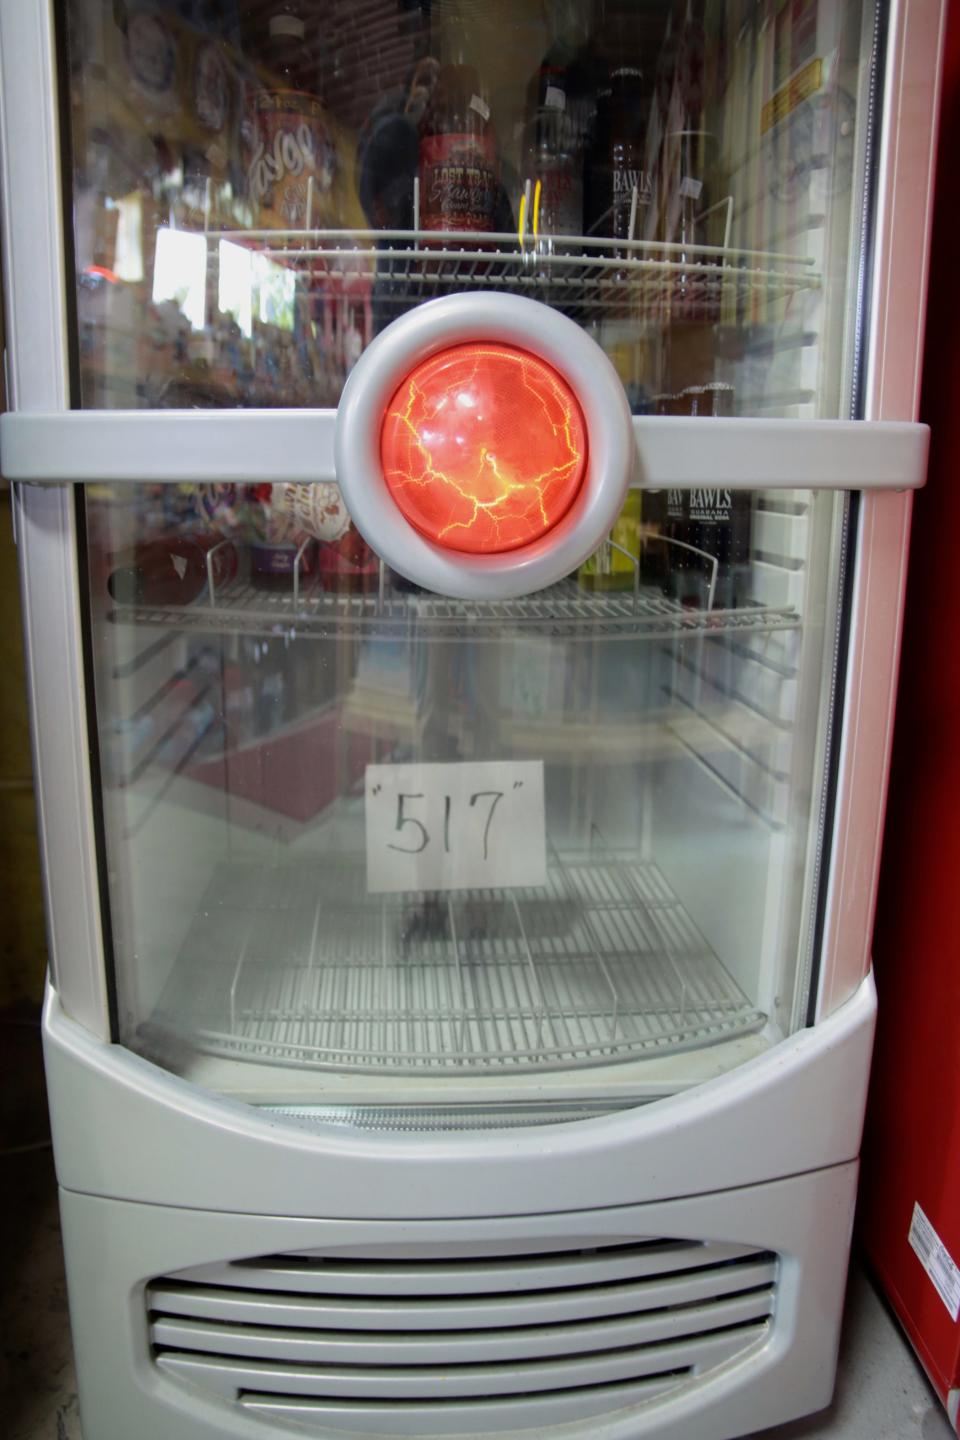 Part of the 517 Party on Tuesday at Nova's Soda Pop Candy Shop in downtown Adrian was a scavenger hunt where people had to look for "517" signs at participating businesses. This sign is in one of Nova's pop coolers.